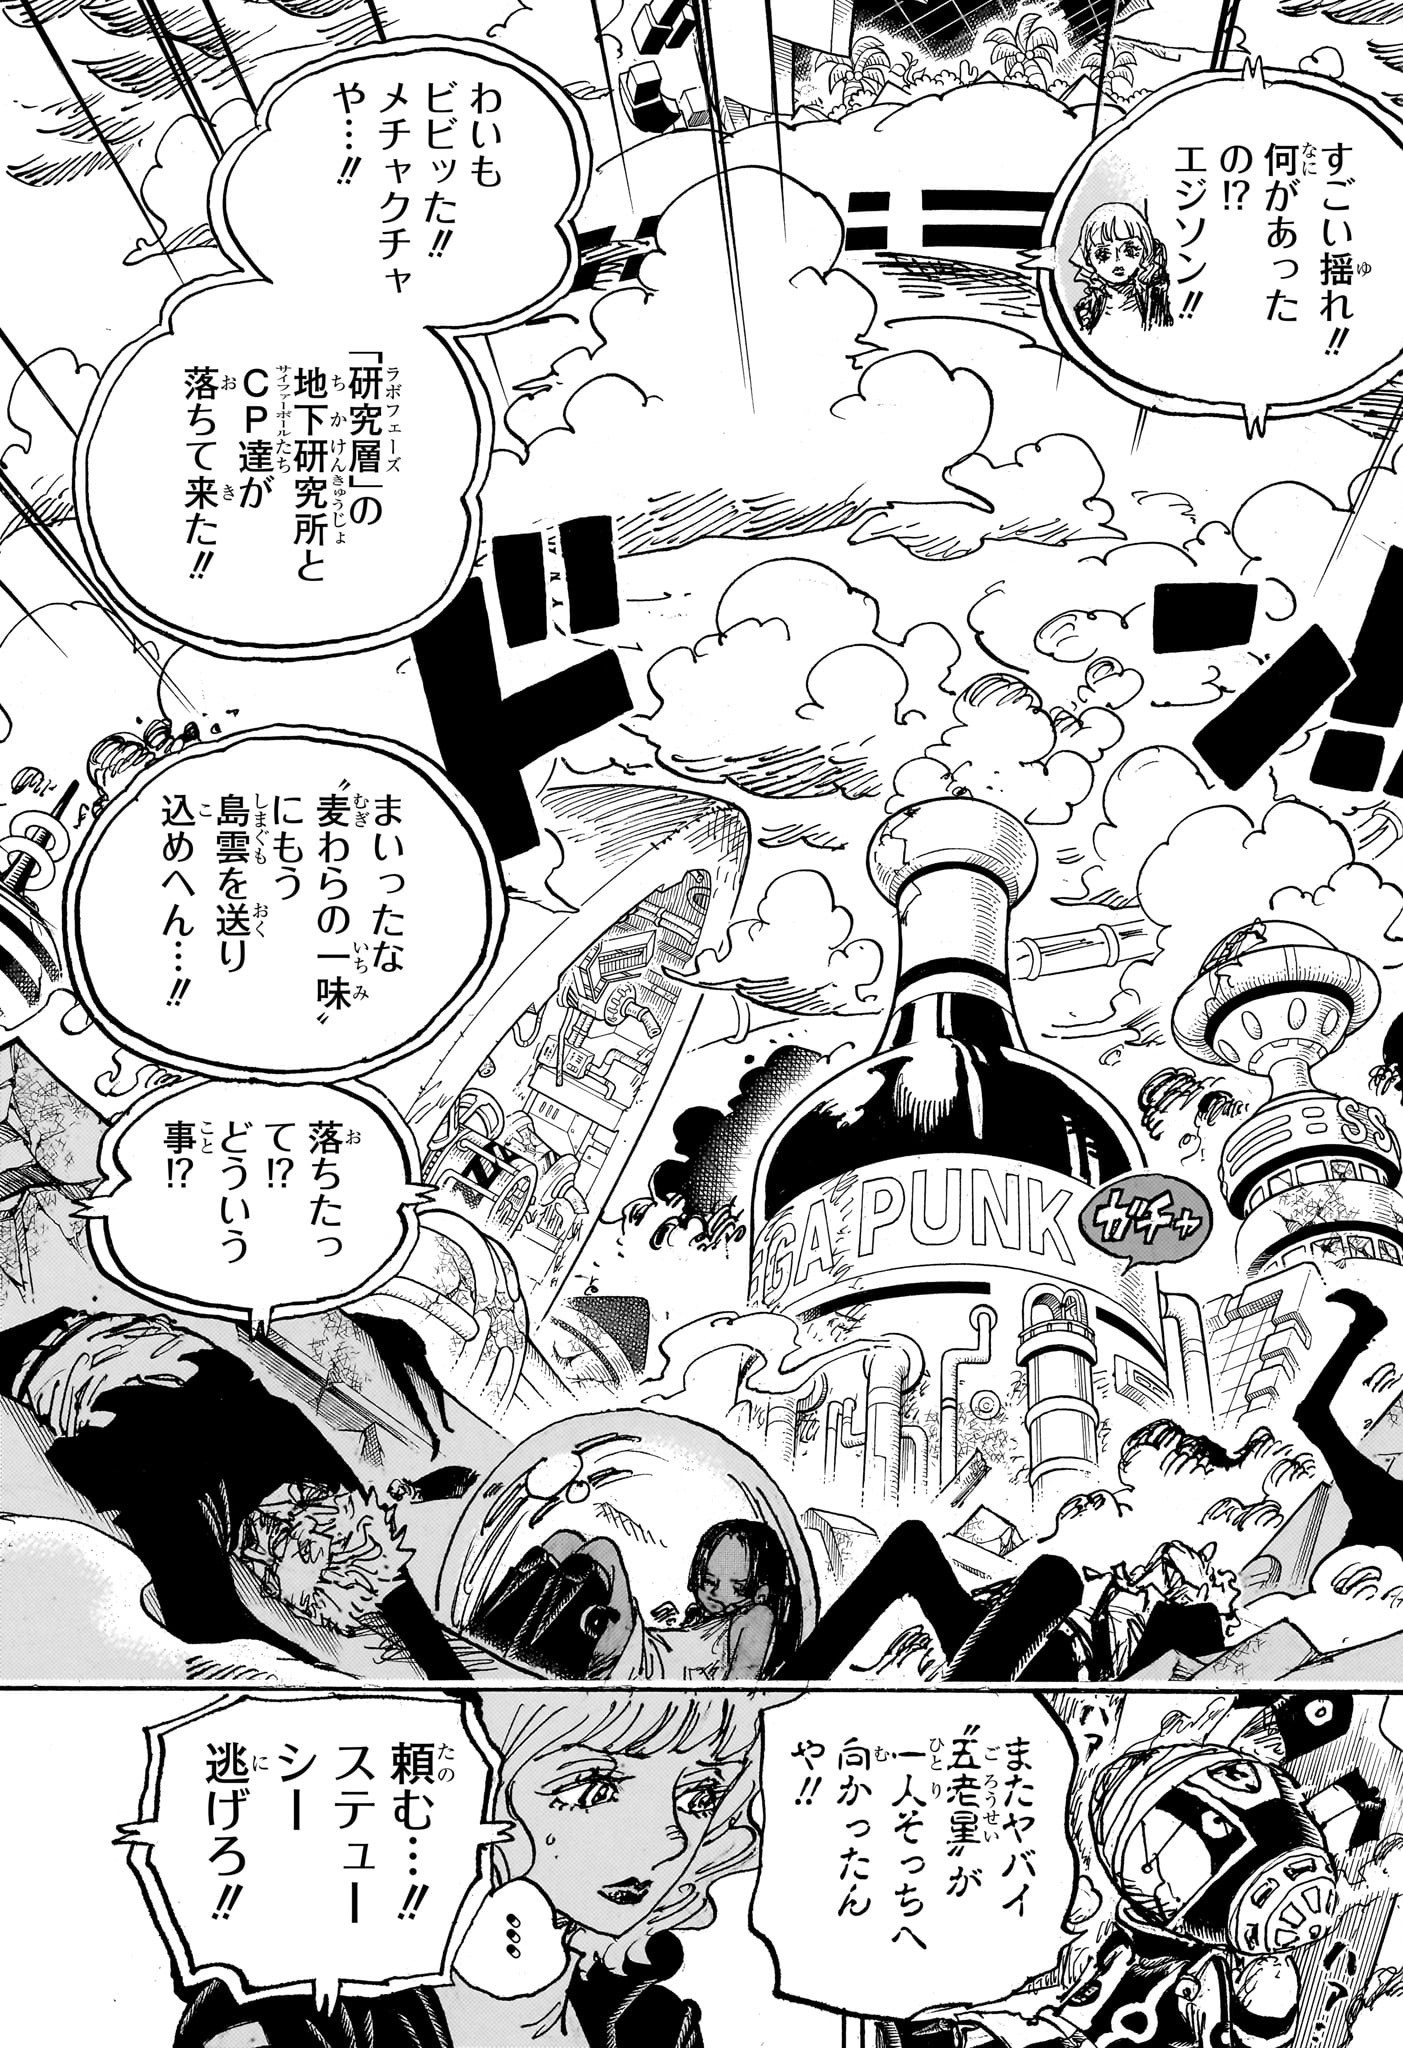 One Piece - Chapter 1116 - Page 5